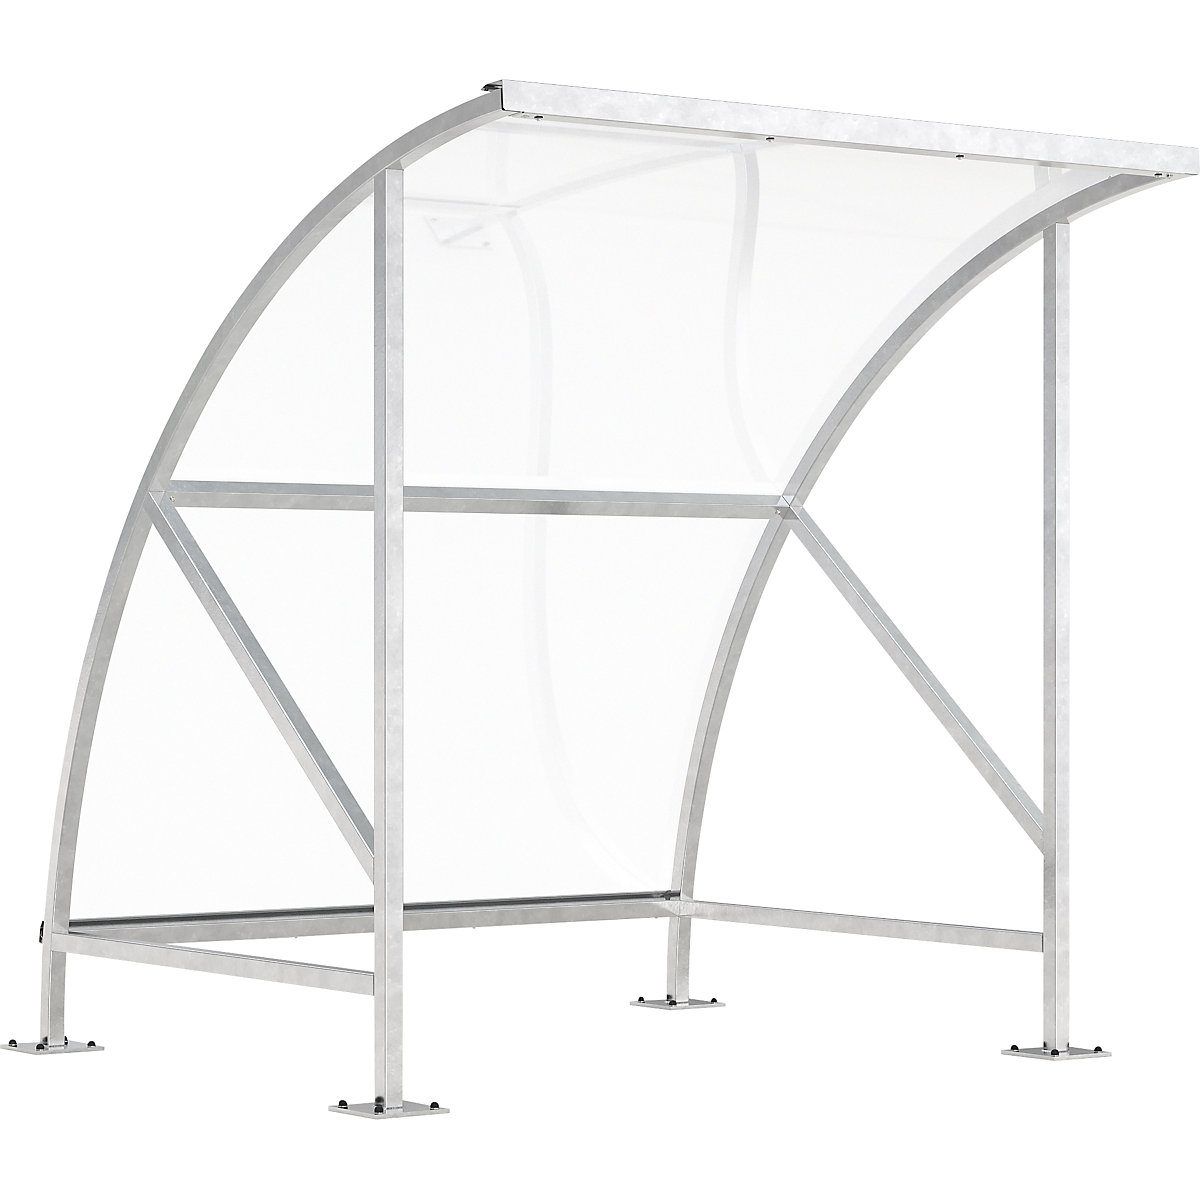 Bicycle shelter, made of polycarbonate, WxD 2090 x 2100 mm, silver-11